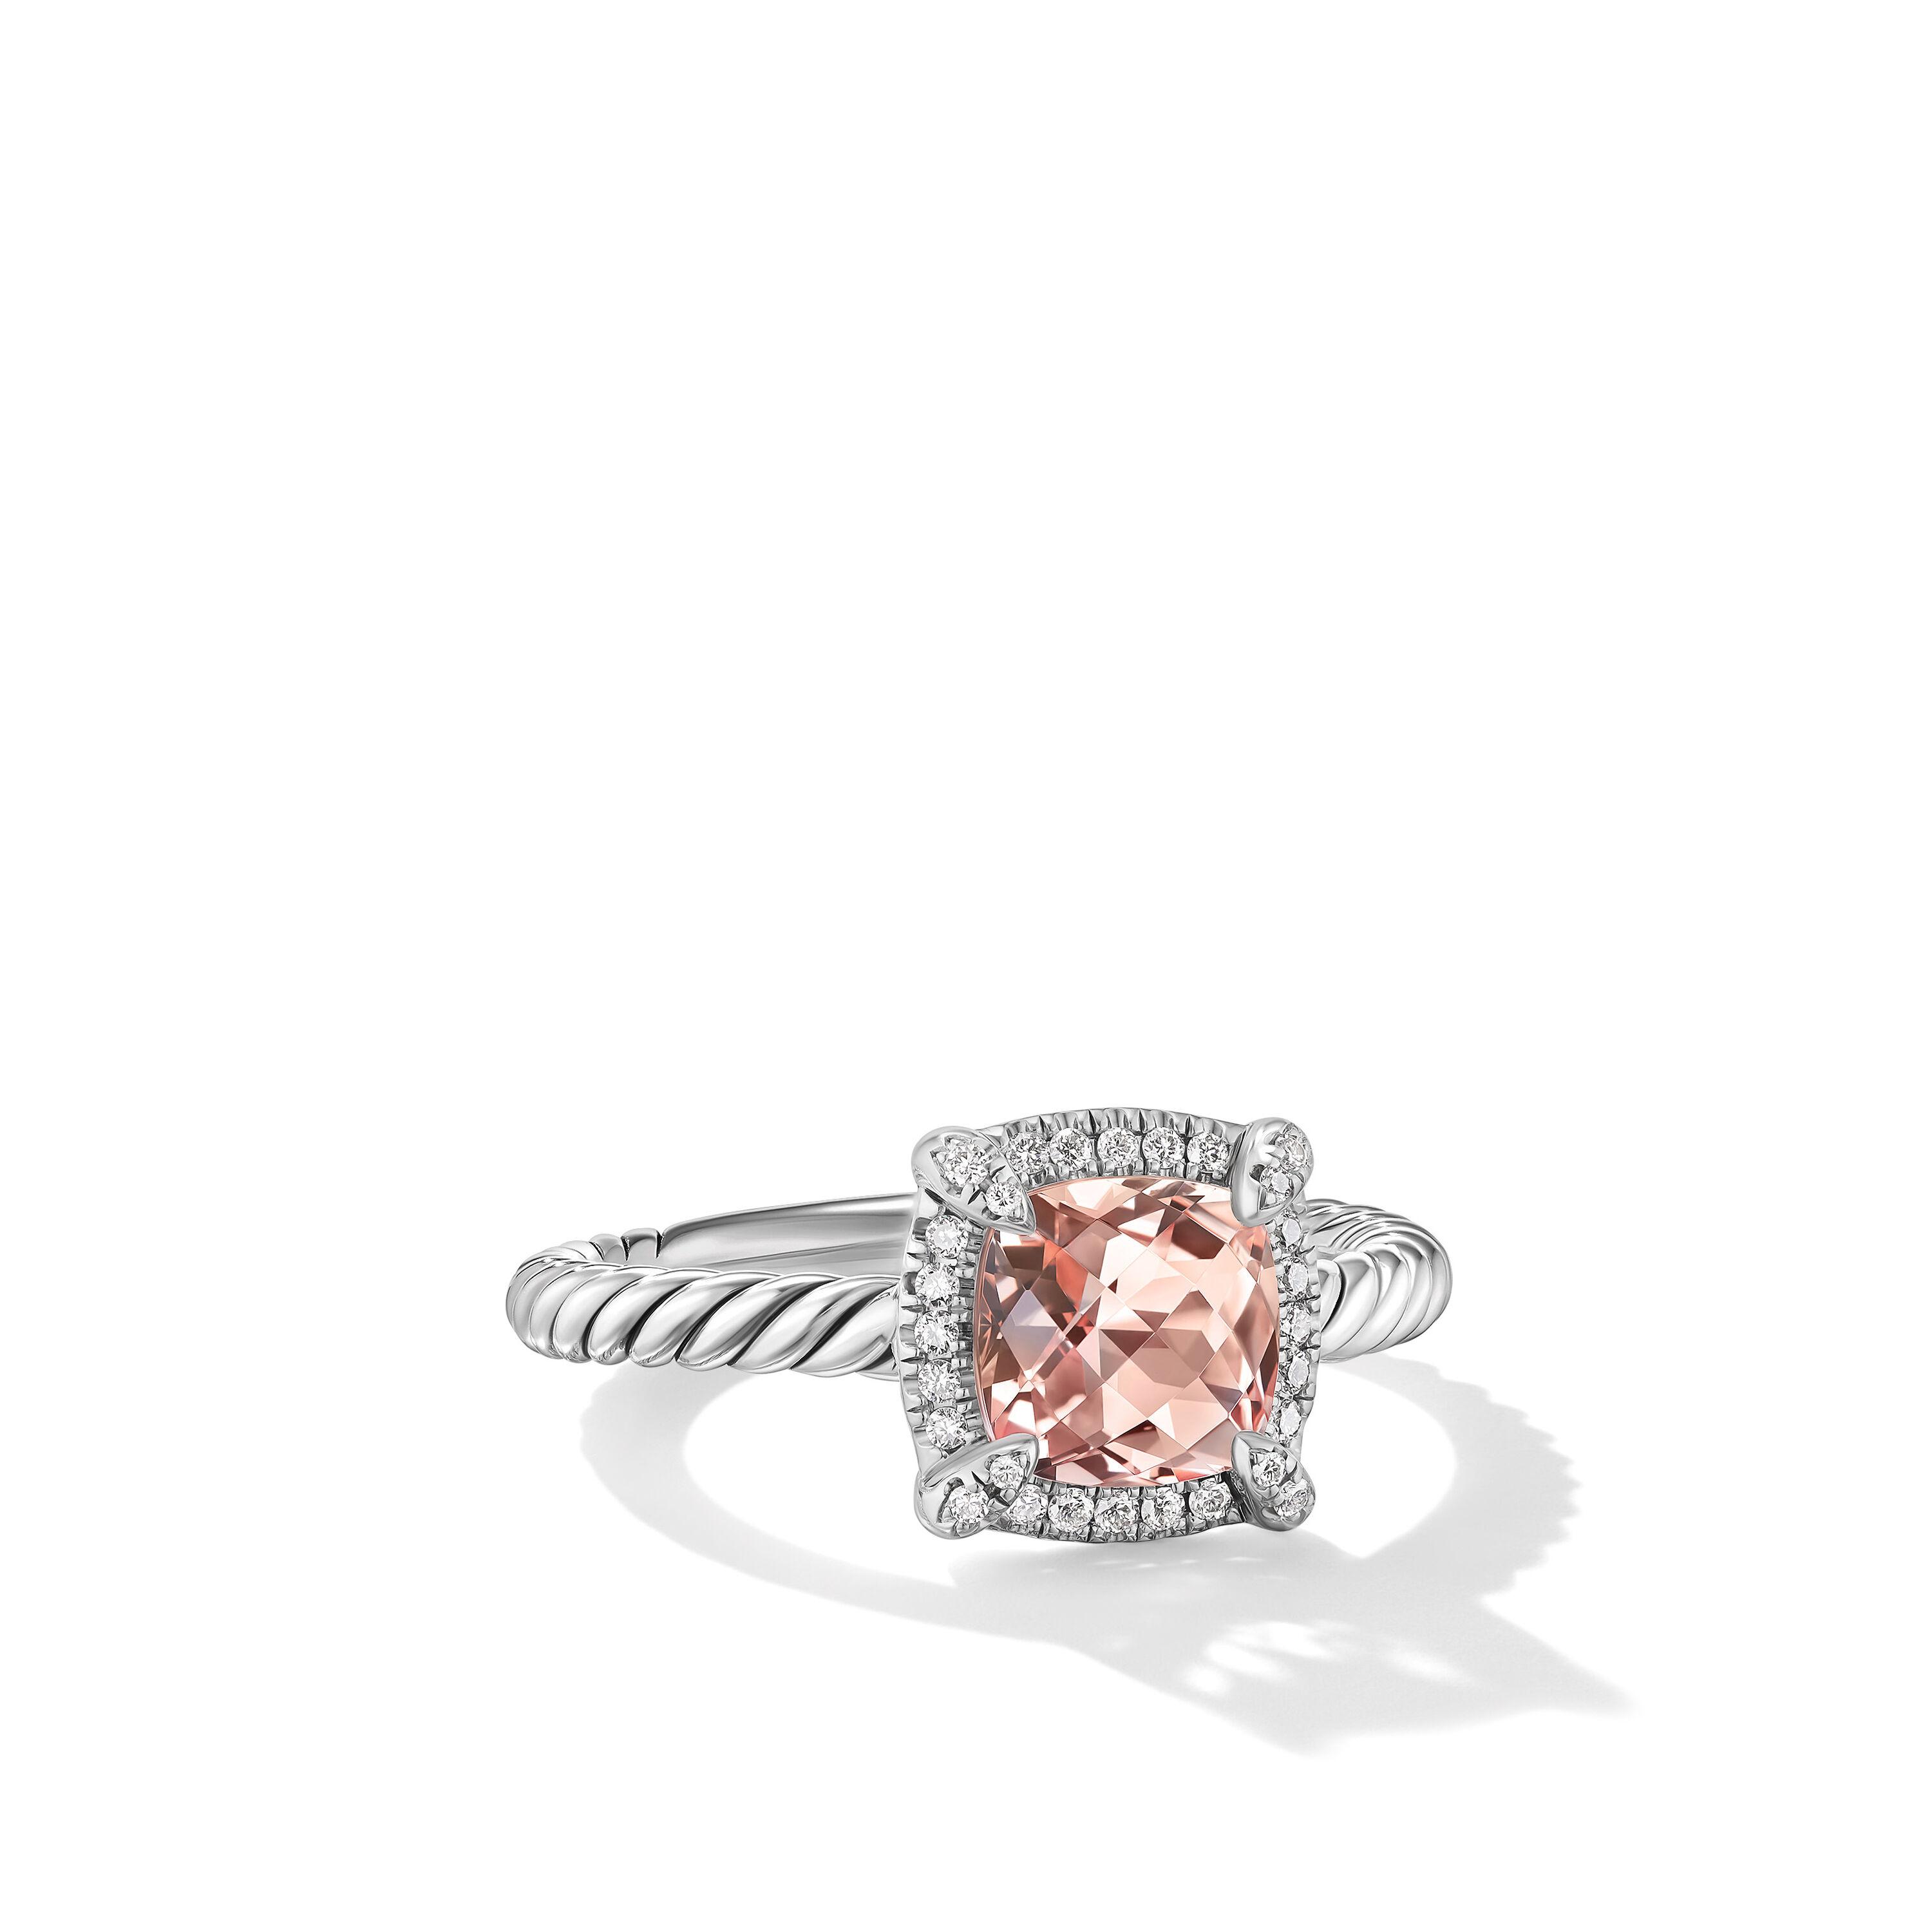 David Yurman Petite Chatelaine Pave Bezel Ring in Sterling Silver with Morganite and Diamonds, Size 6.5 0